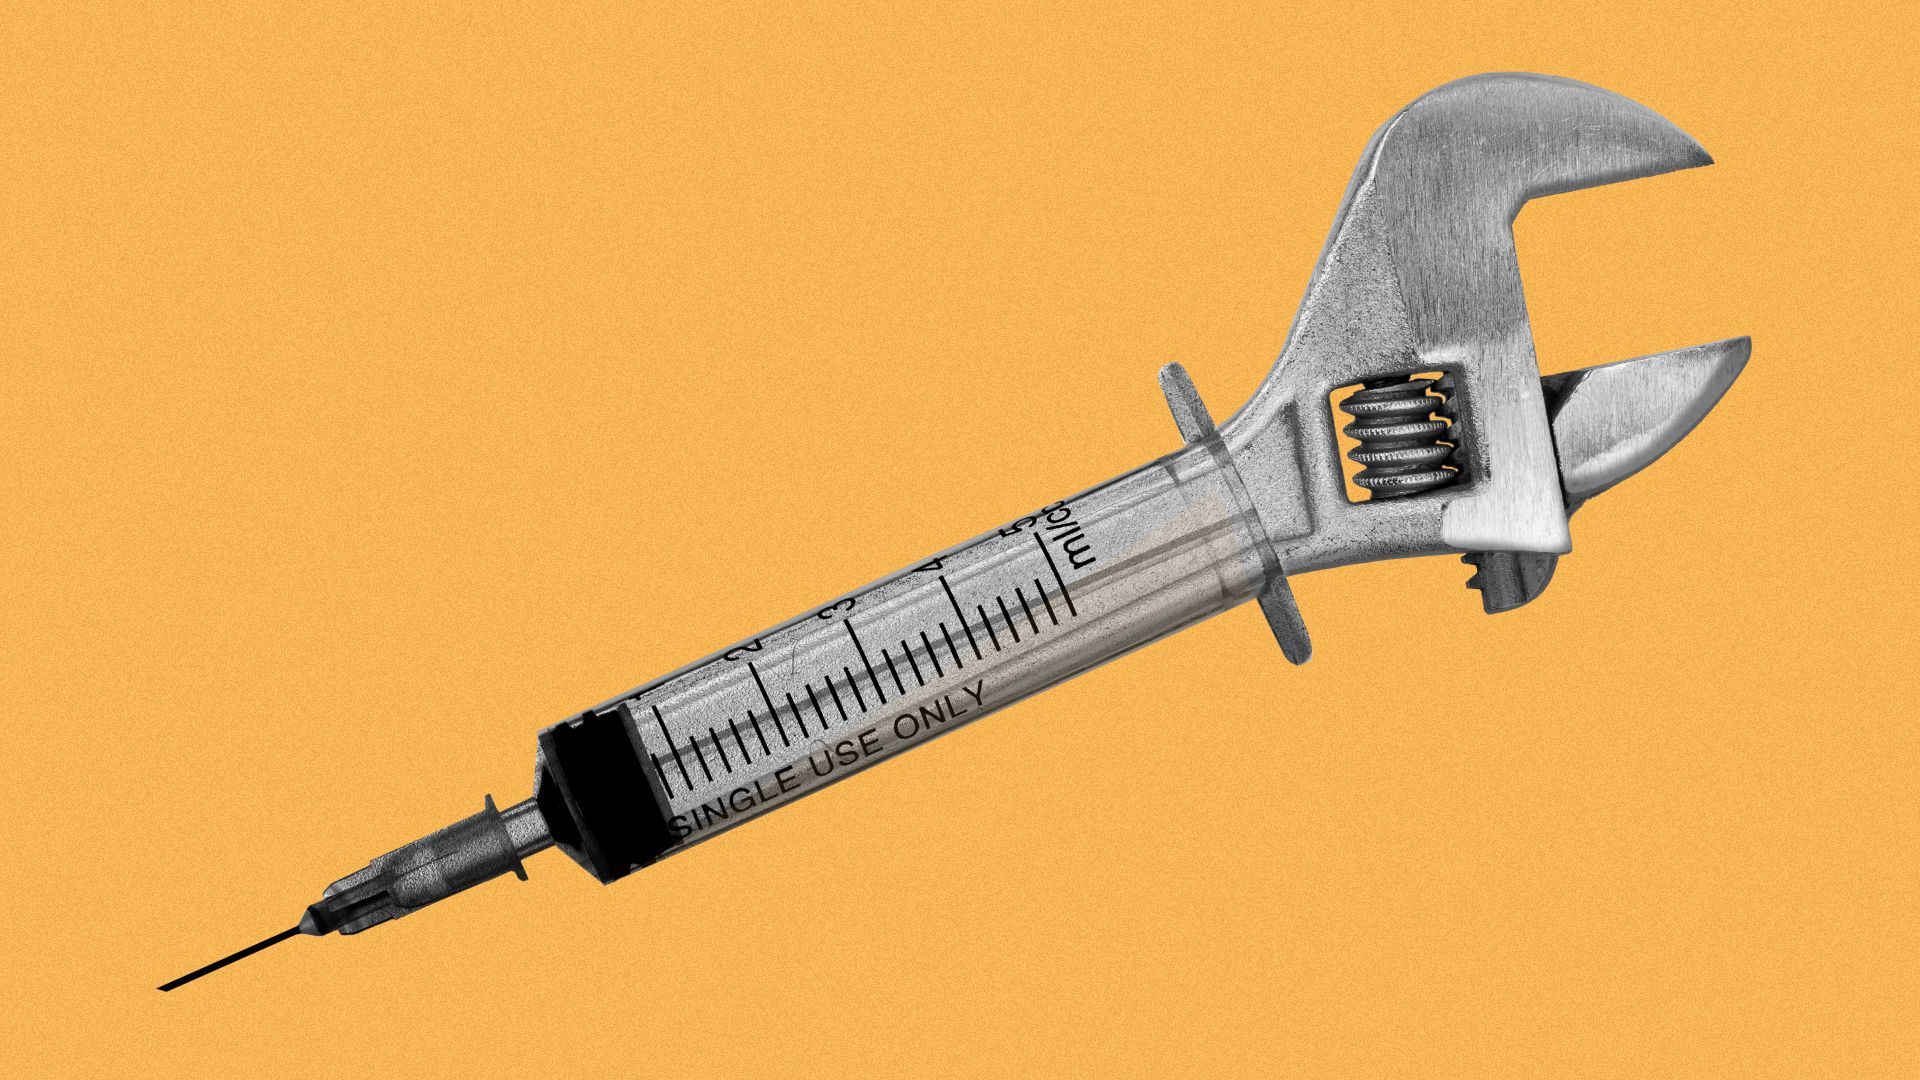 Illustration of a syringe with a wrench at the end